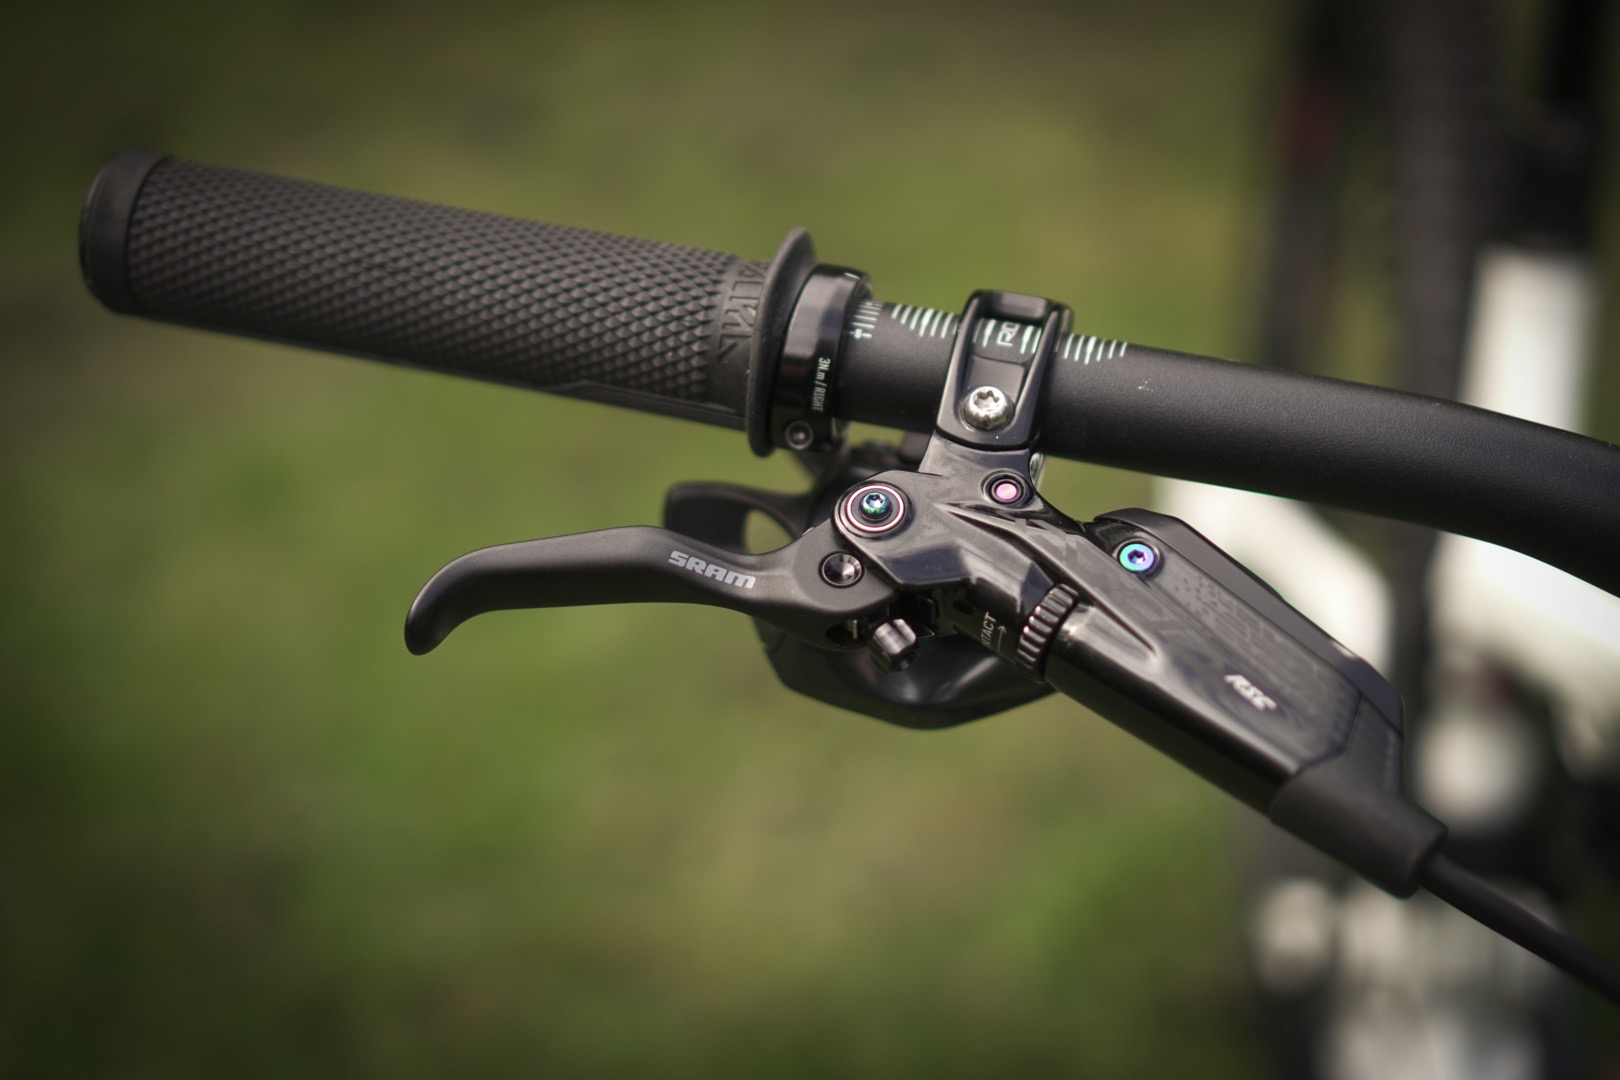 2021 Commencal Meta AM 29 First Look